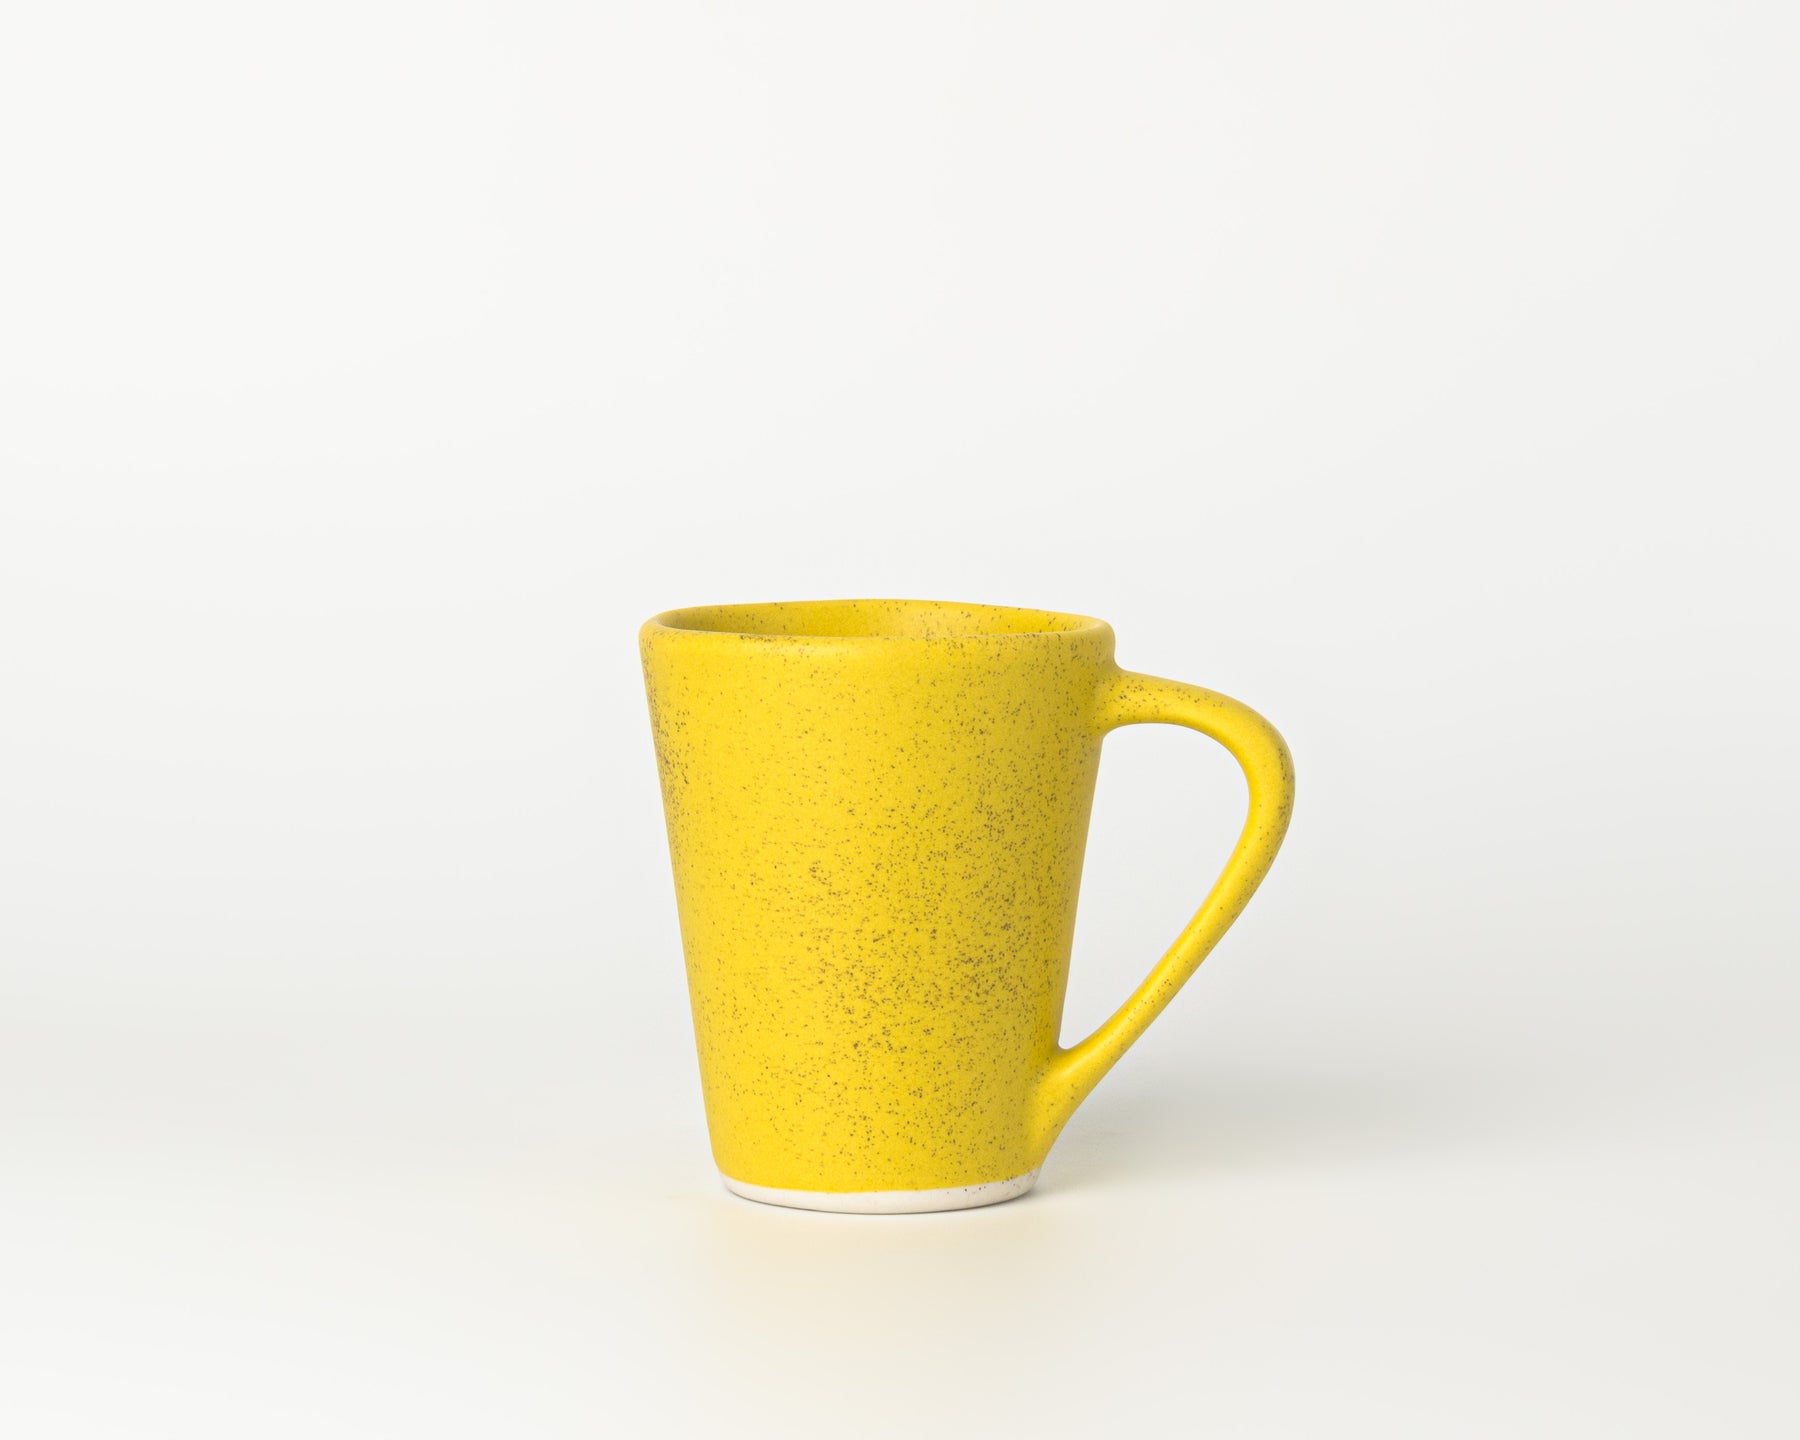 A pair of yellow Therma cups – Therma Cup co